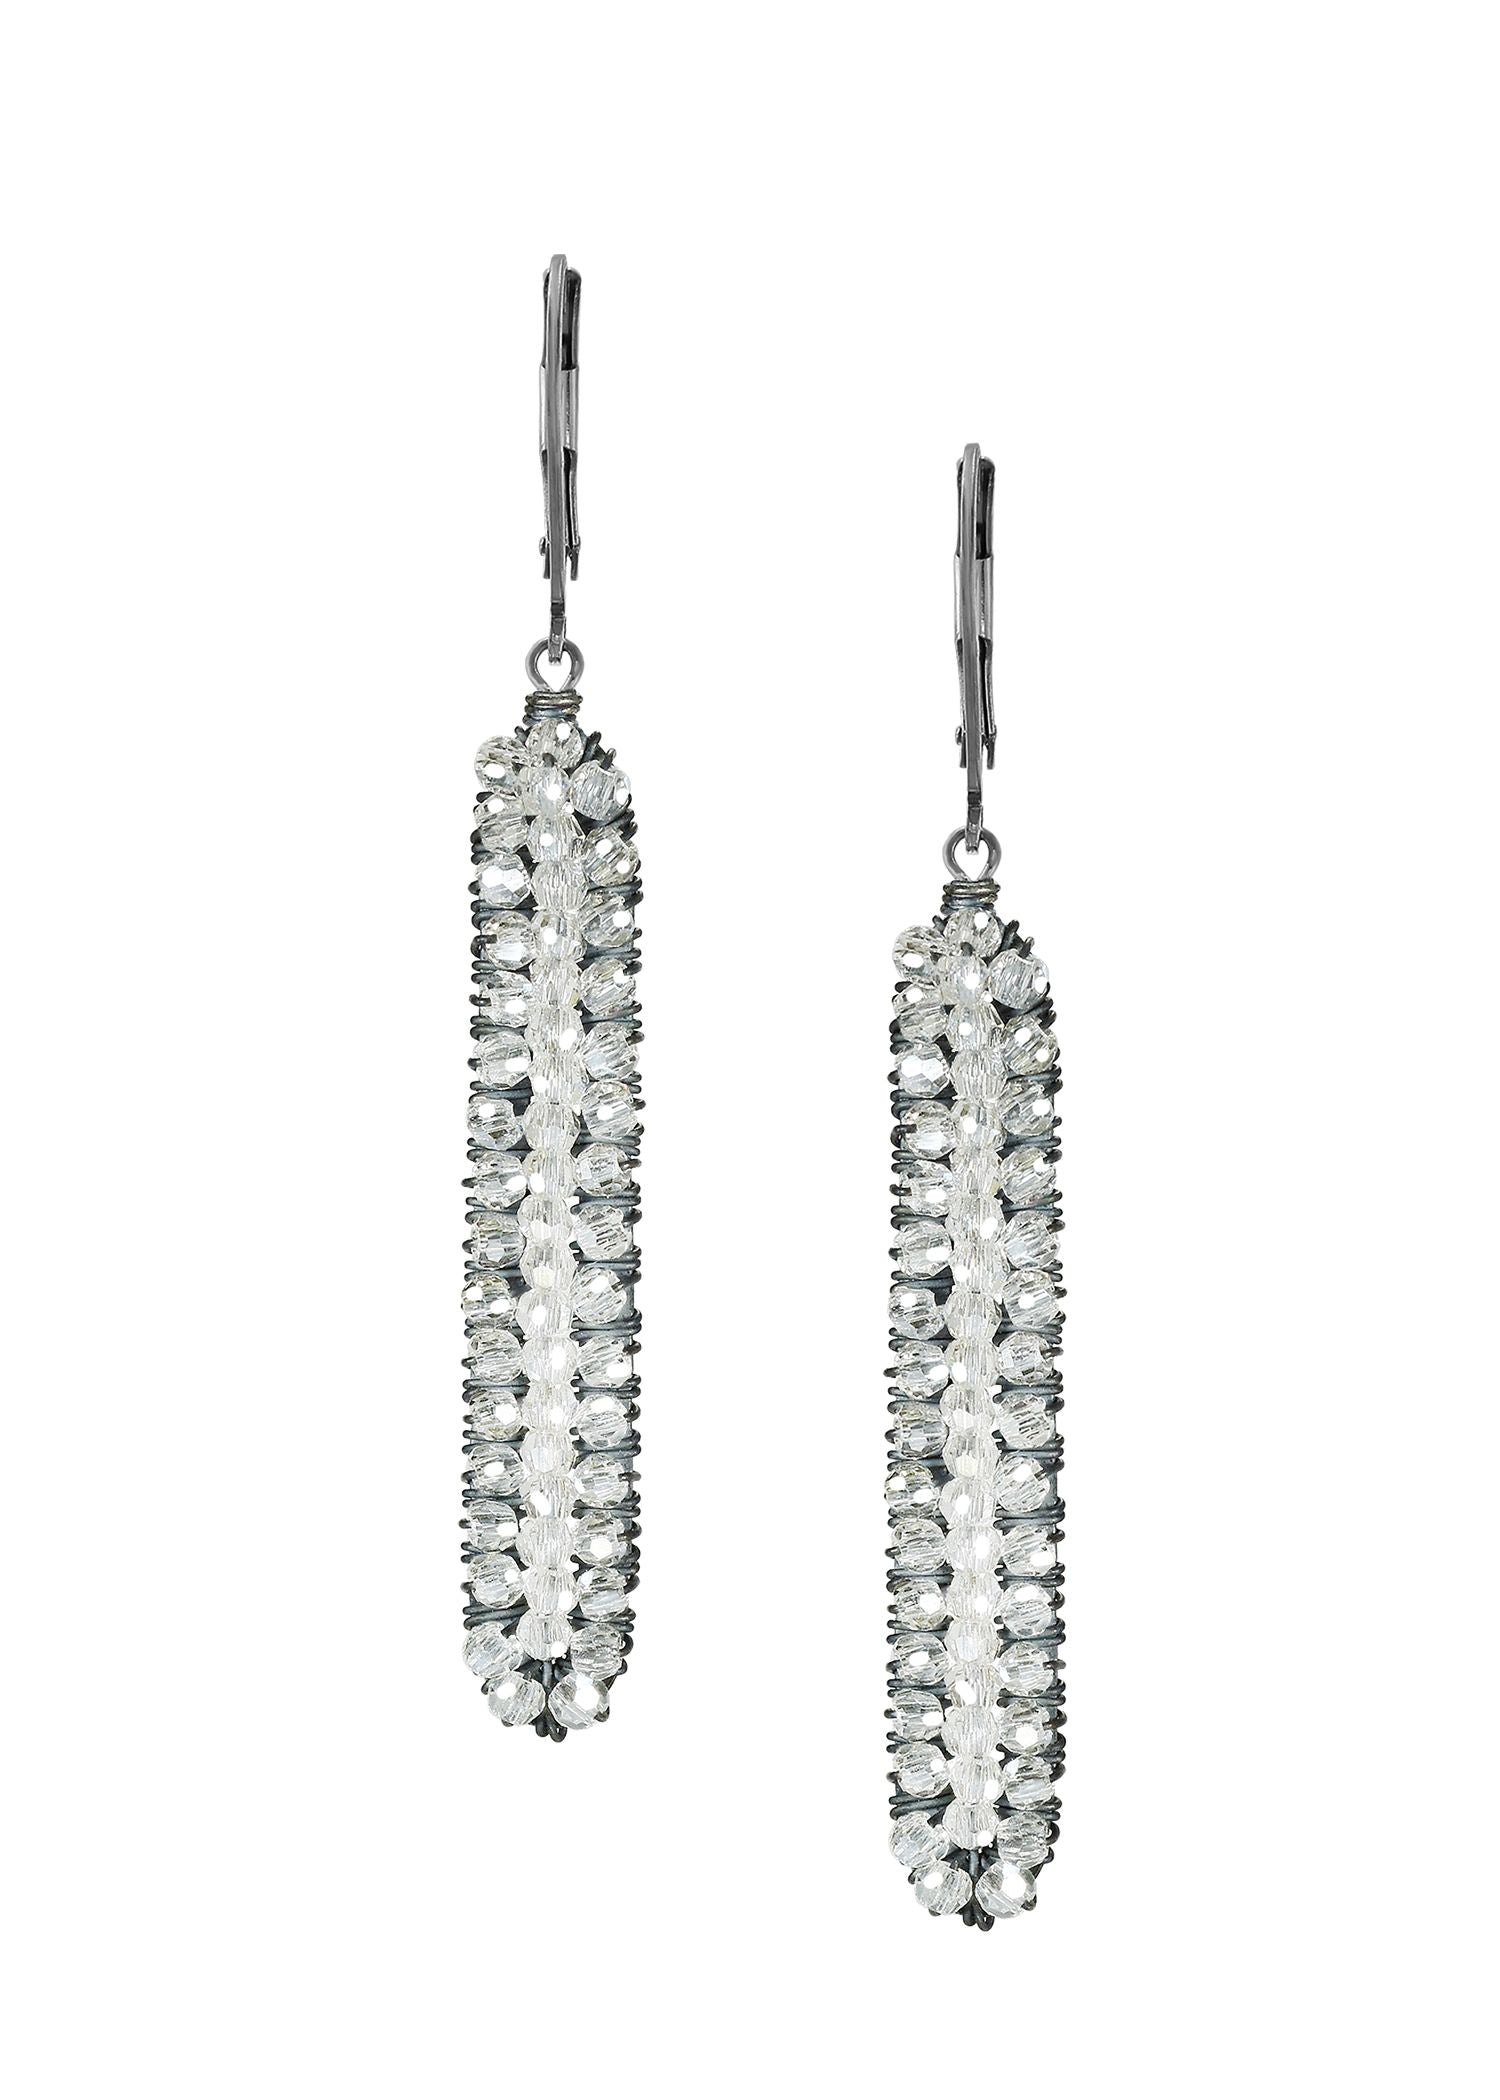 Crystal Sterling silver Earrings measure 2" in length (including the levers) and 1/4" in width Handmade in our Los Angeles studio